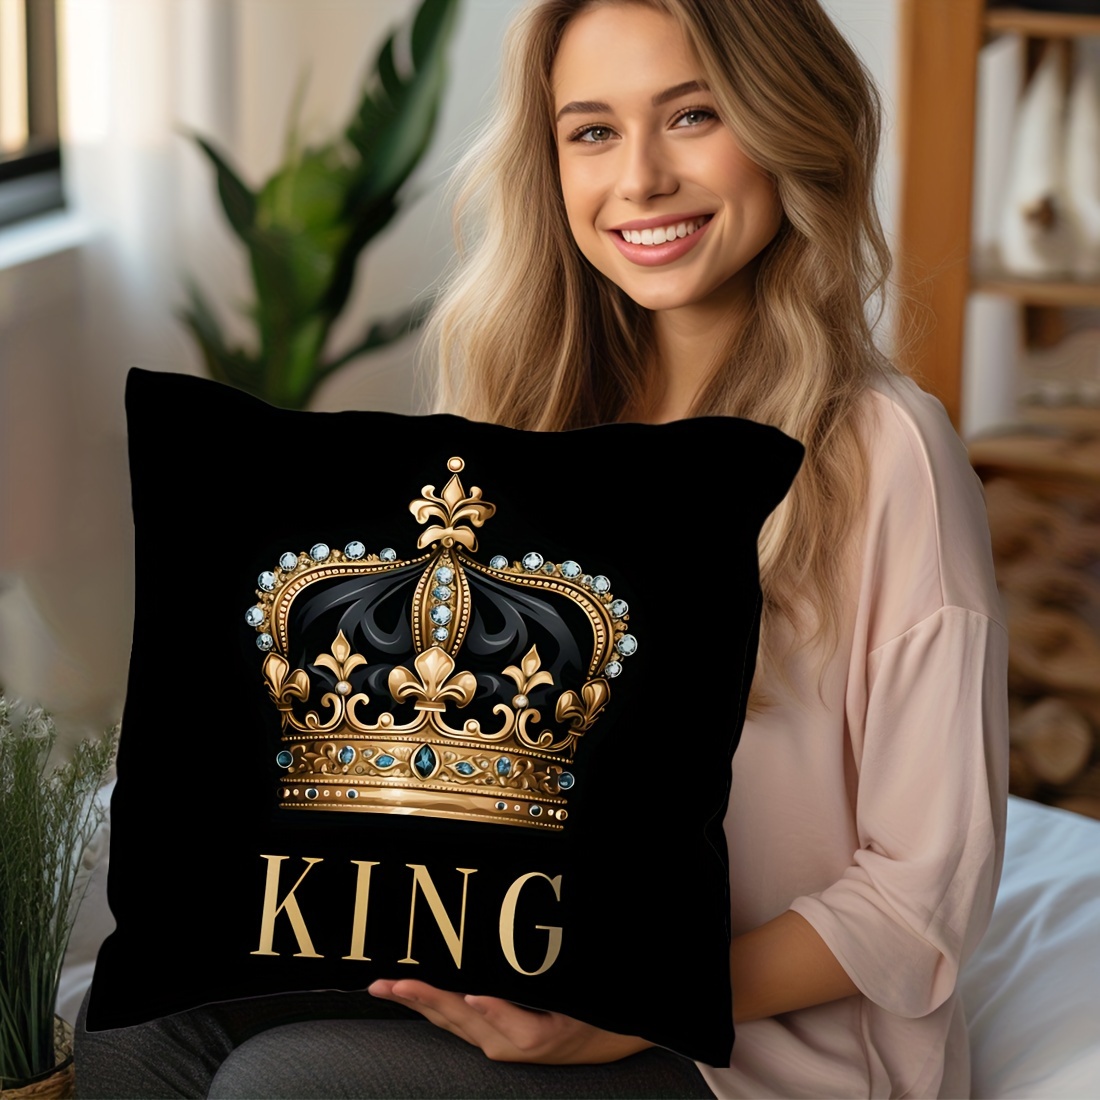 

1/2pcs, 17.7x17.7inch King & Queen Crown Decorative Peach Skin Velvet Pillow Covers, Black And Gold, Single-sided Print, No Insert, Contemporary Style Cushion Cases For Sofa, Bedroom, Car, Home Decor